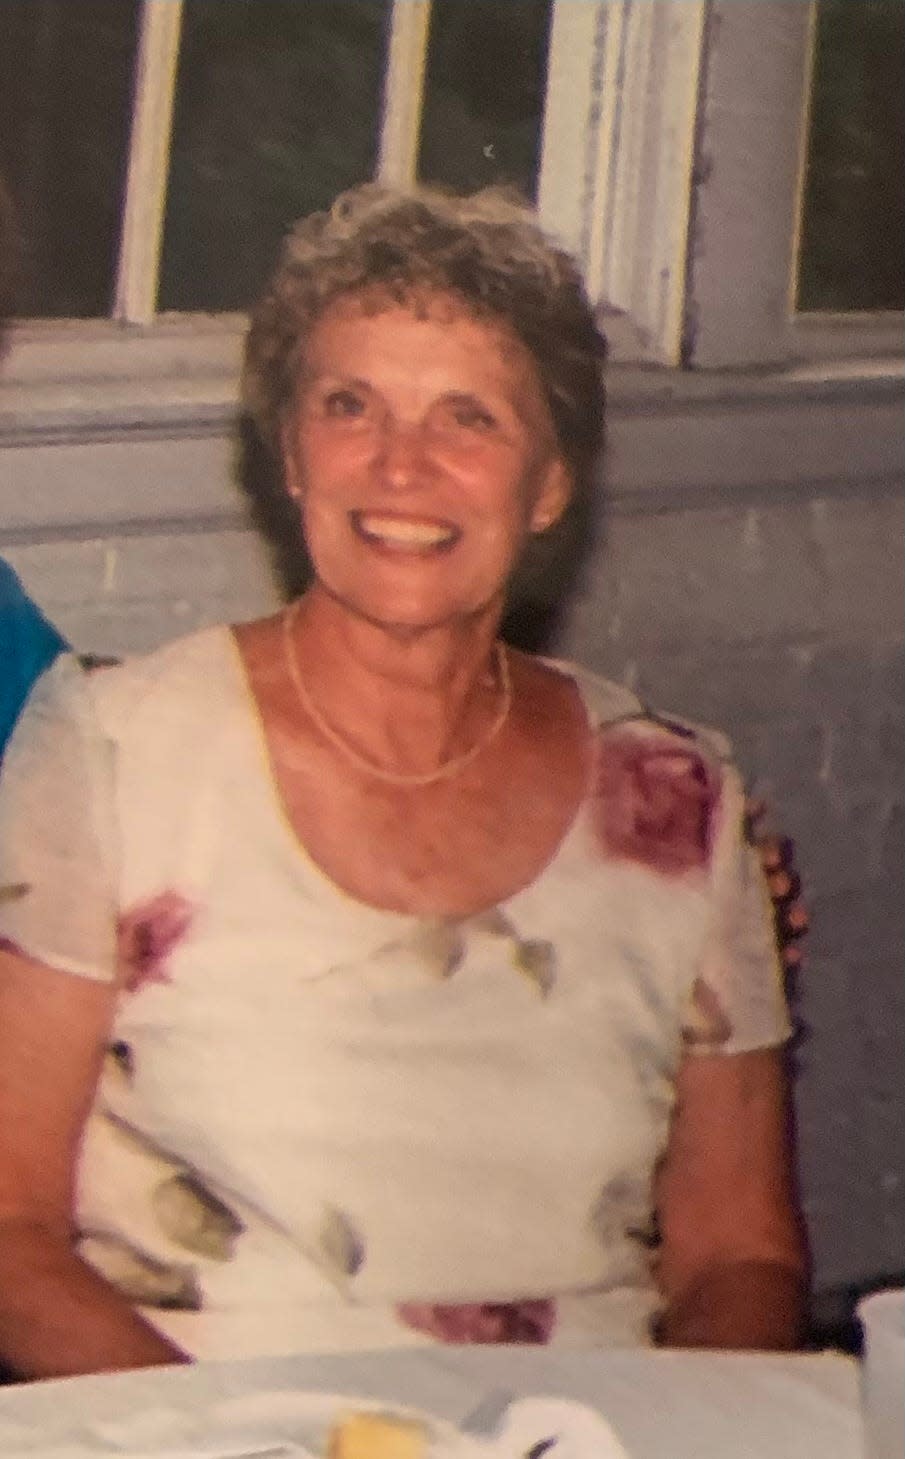 Beverly Kinney was a long-time teacher at Princeton City Schools and patron of the arts. She was killed Jan. 11 after being struck by the driver of a Cincinnati Metro bus while in a crosswalk on the border of Hyde Park and Evanston. She was 87.